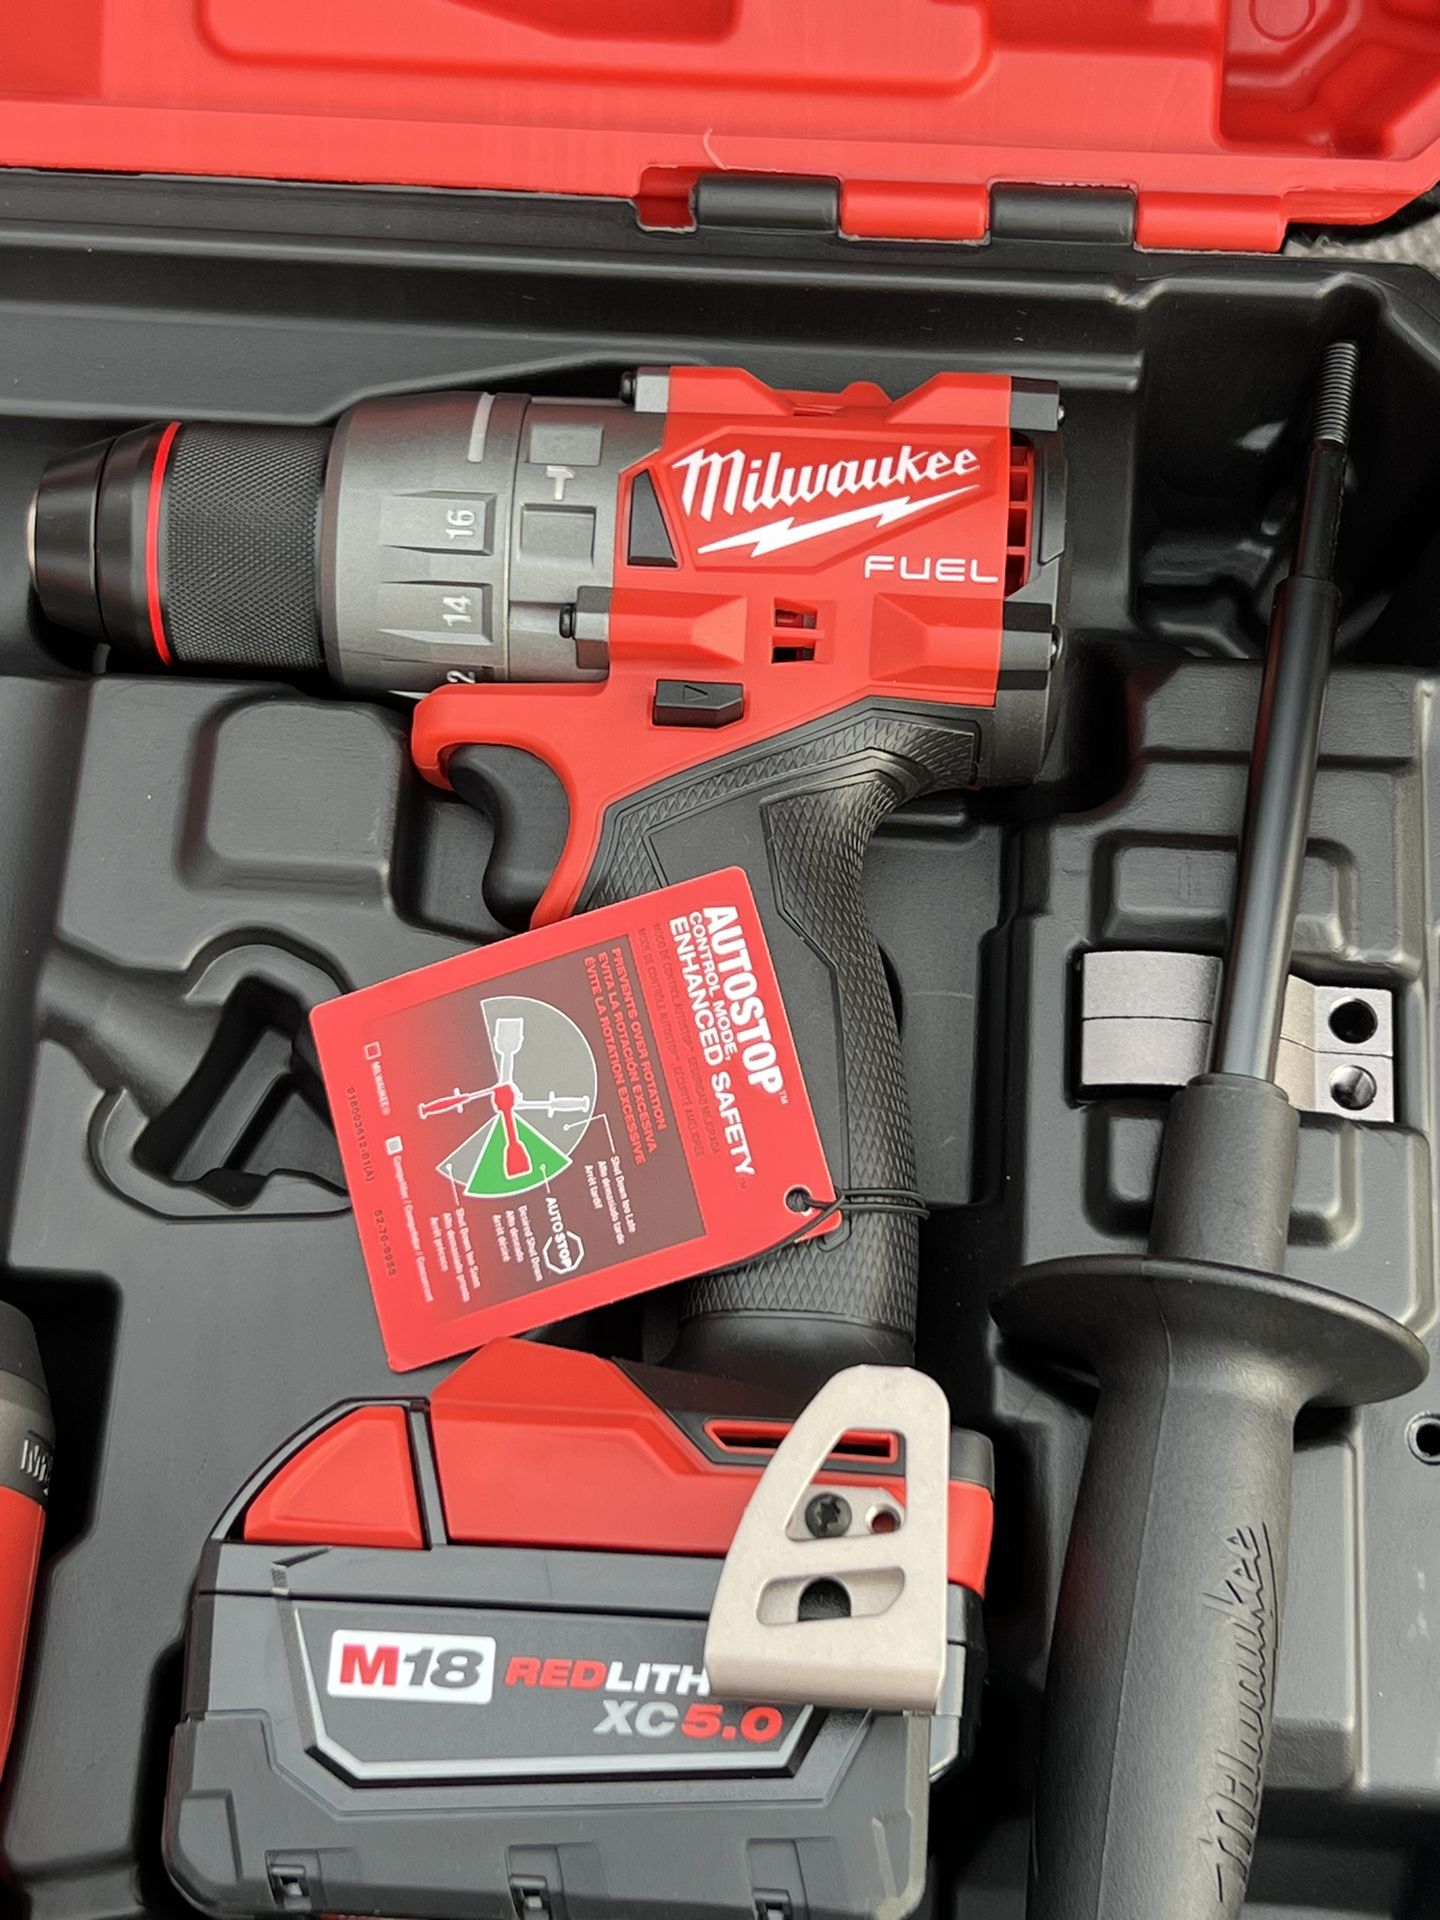 Milwaukee Fuel Rapid Stop Hammer Drill $110 Tool Only  $170 With Battery 5.0 